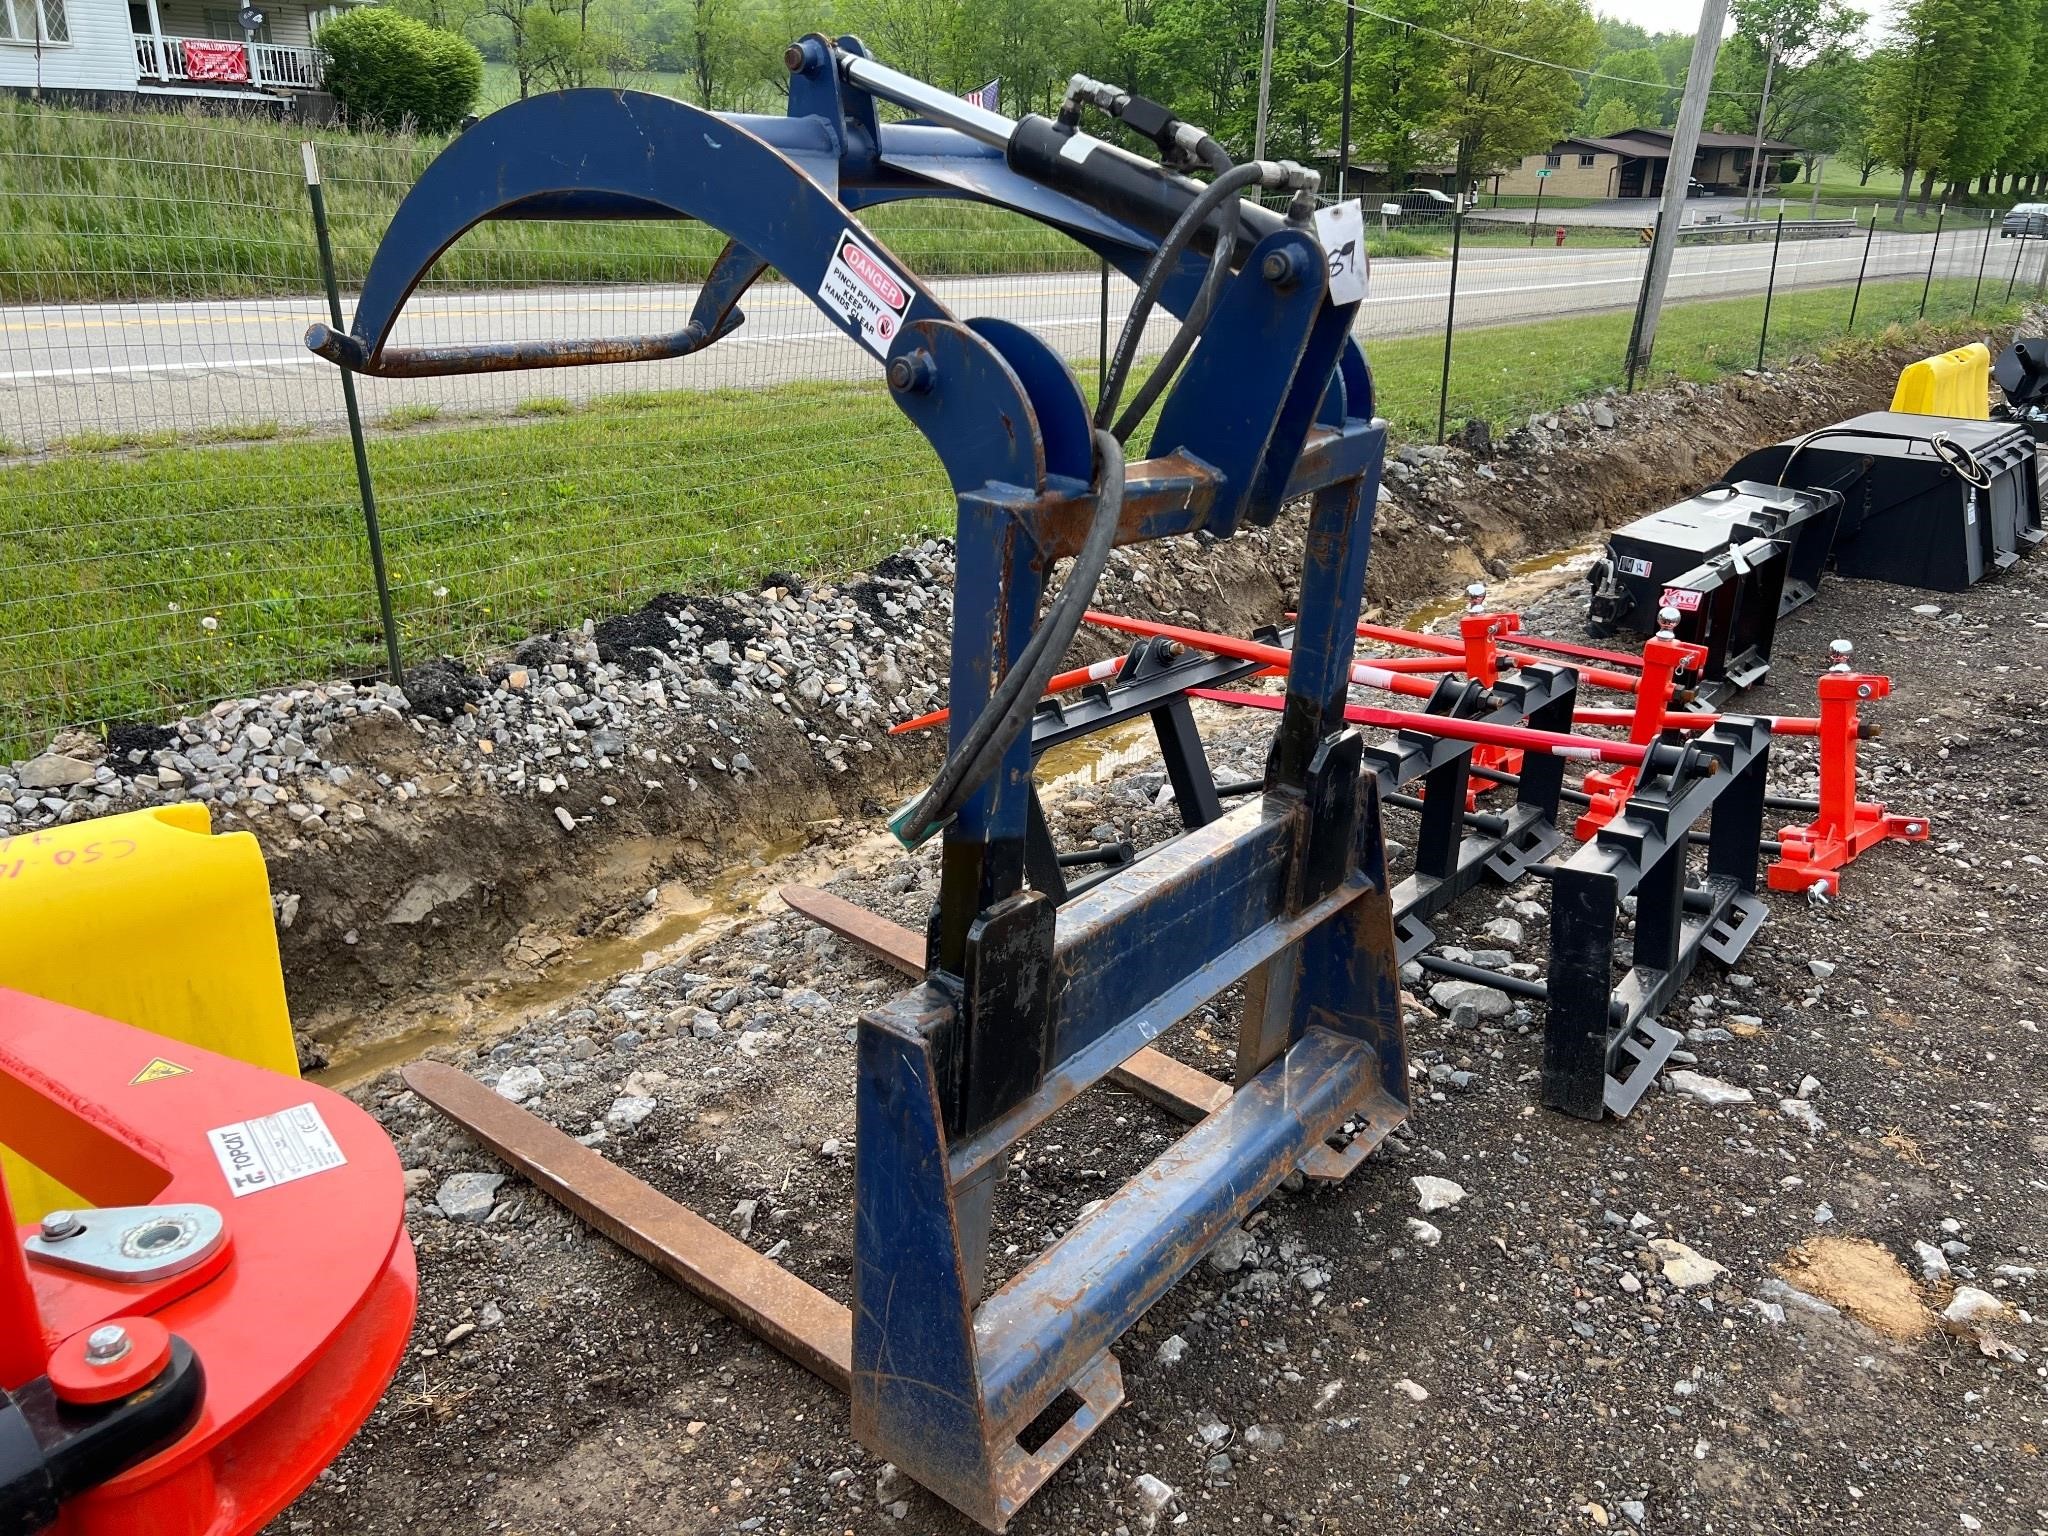 Quick Attach Skid Steer Grapple Forks